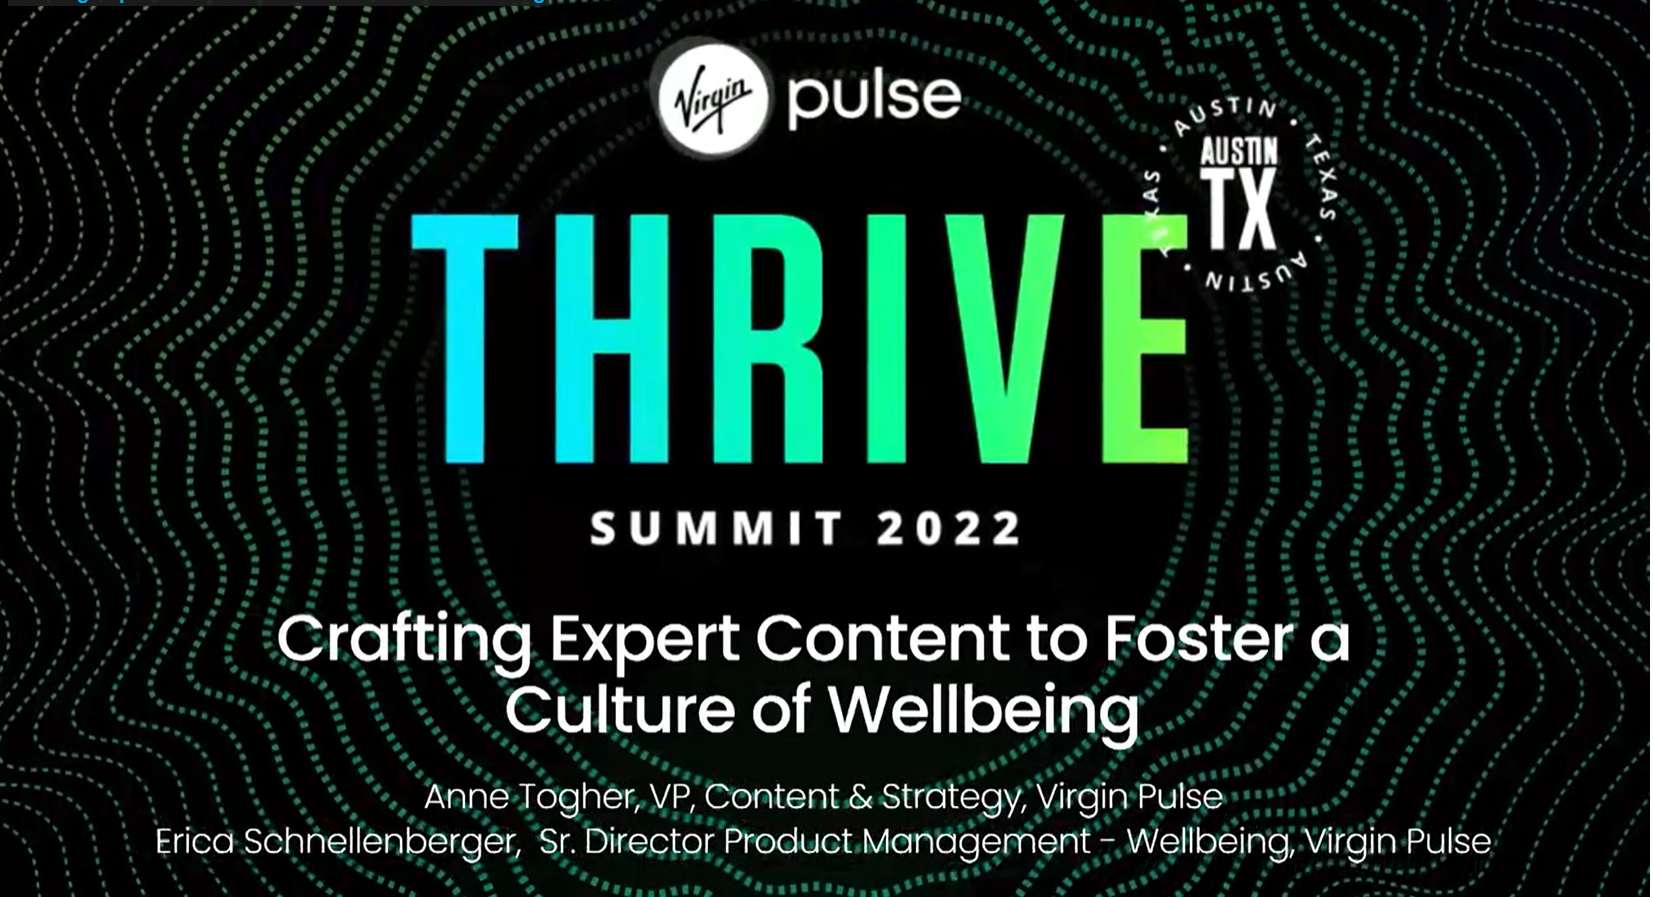 Crafting Expert Content to Foster a Culture of Wellbeing